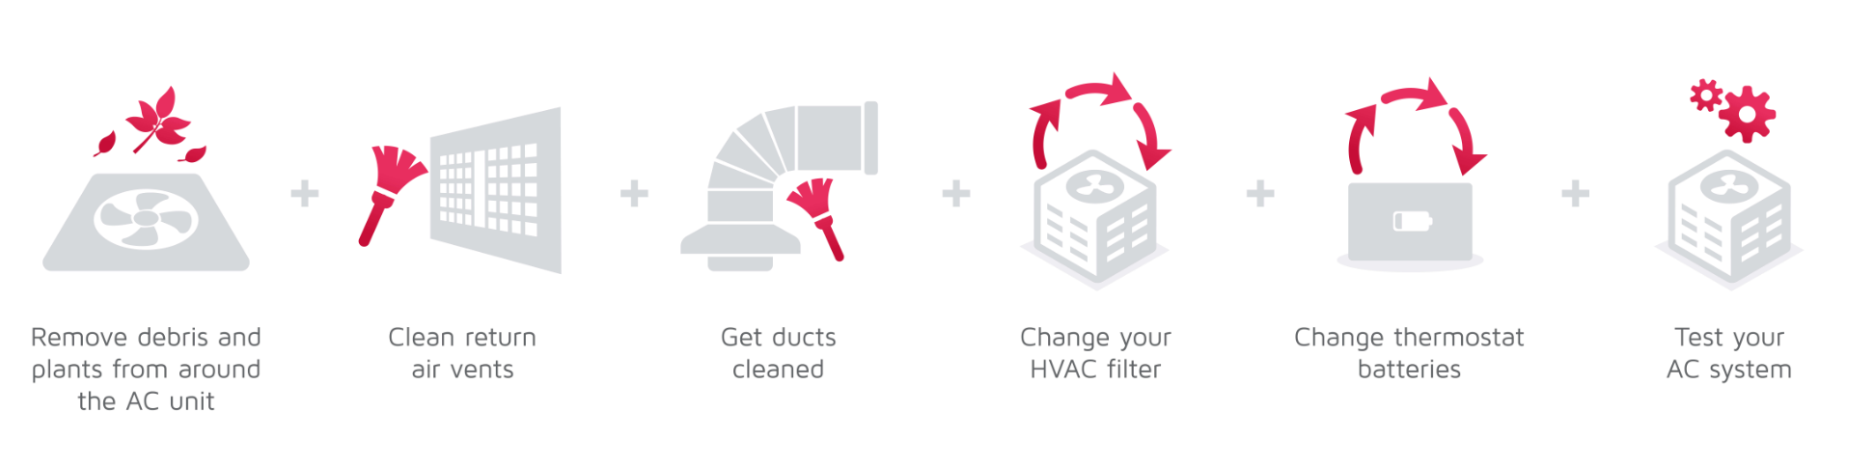 Steps to clean your HVAC infographic